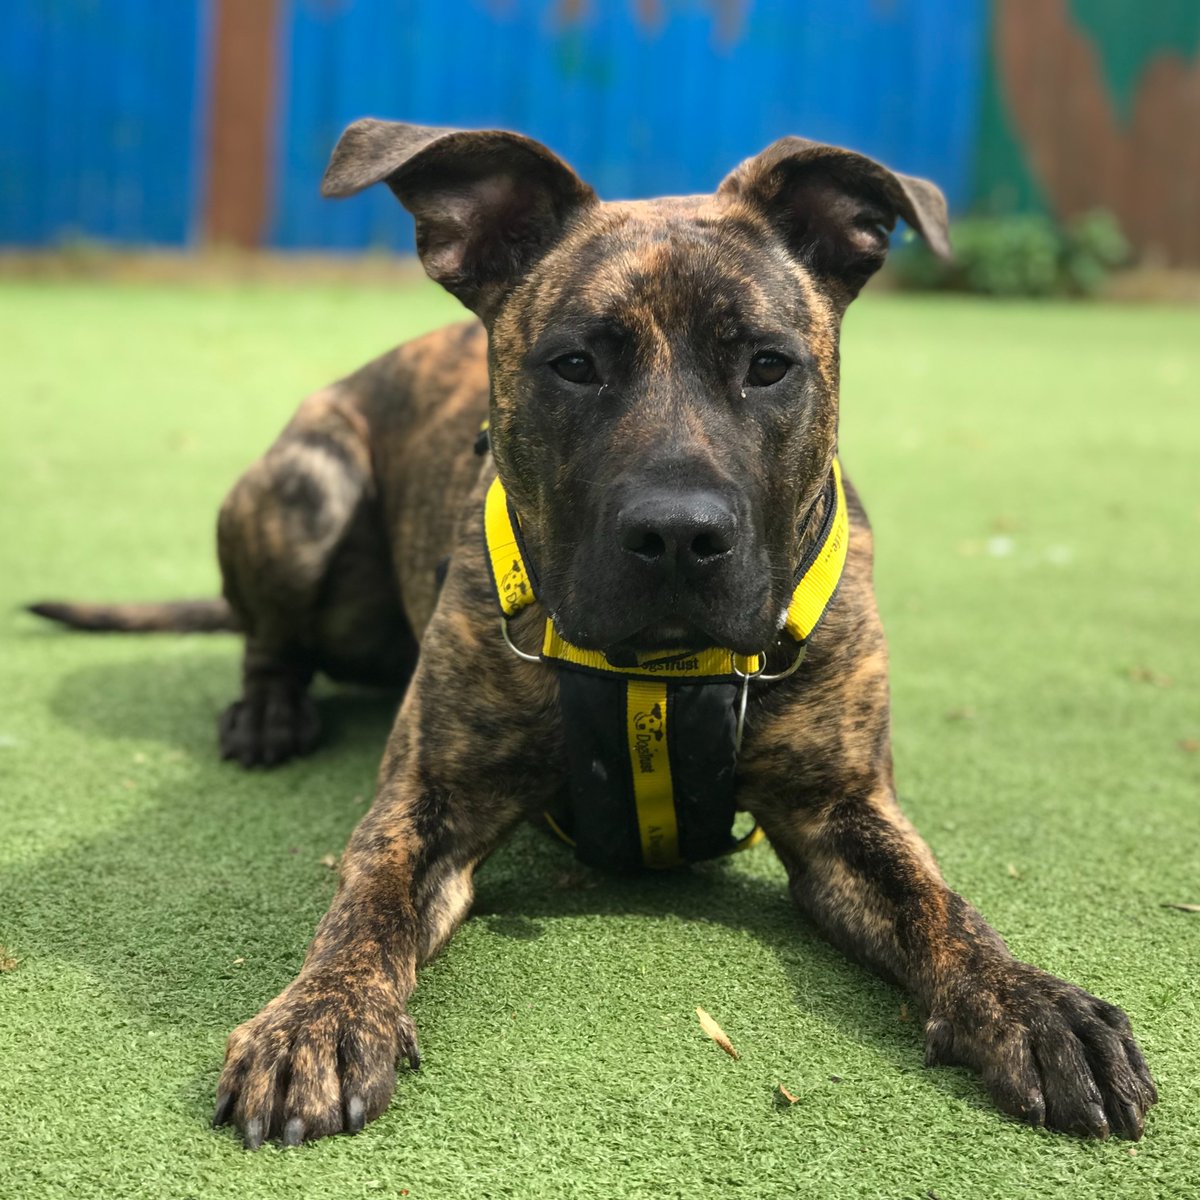 And the best 'down' goes to the boy with many tricks! ROGUE is a nine-month-old crossbreed 💛🐶💛 He loves to learn with positive reward training. He is @DogsTrust #Ilfracombe looking for a home. 🏡 dogstrust.org.uk/rehoming/dogs/… 🐾 #ADogIsForLife #ThoseEars #AdoptADog #RescueDog 💛